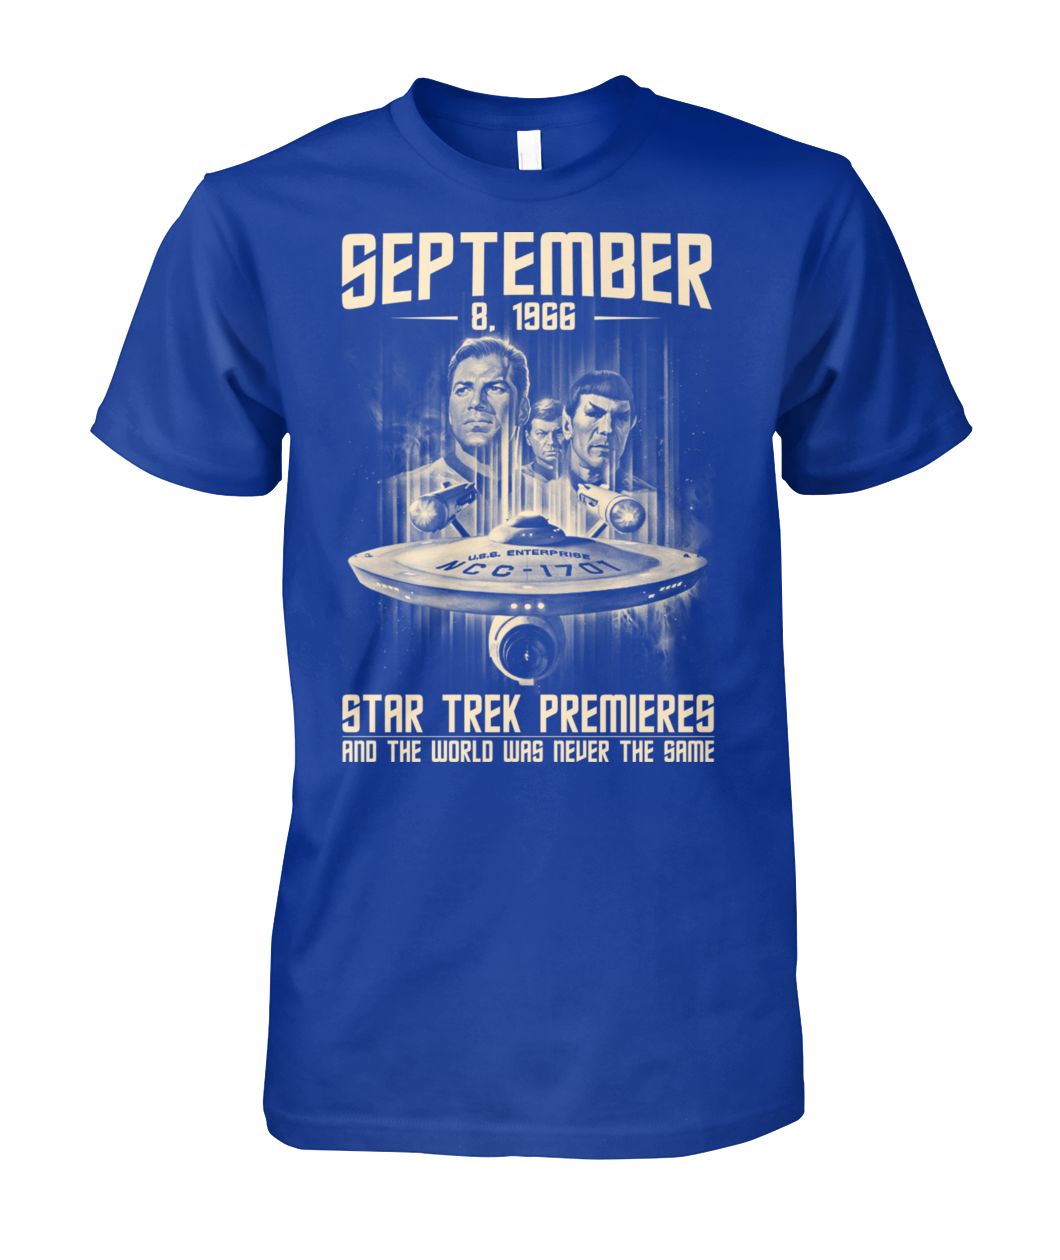 September 8-1966 Star Trek premieres and the world was never the same blue shirt